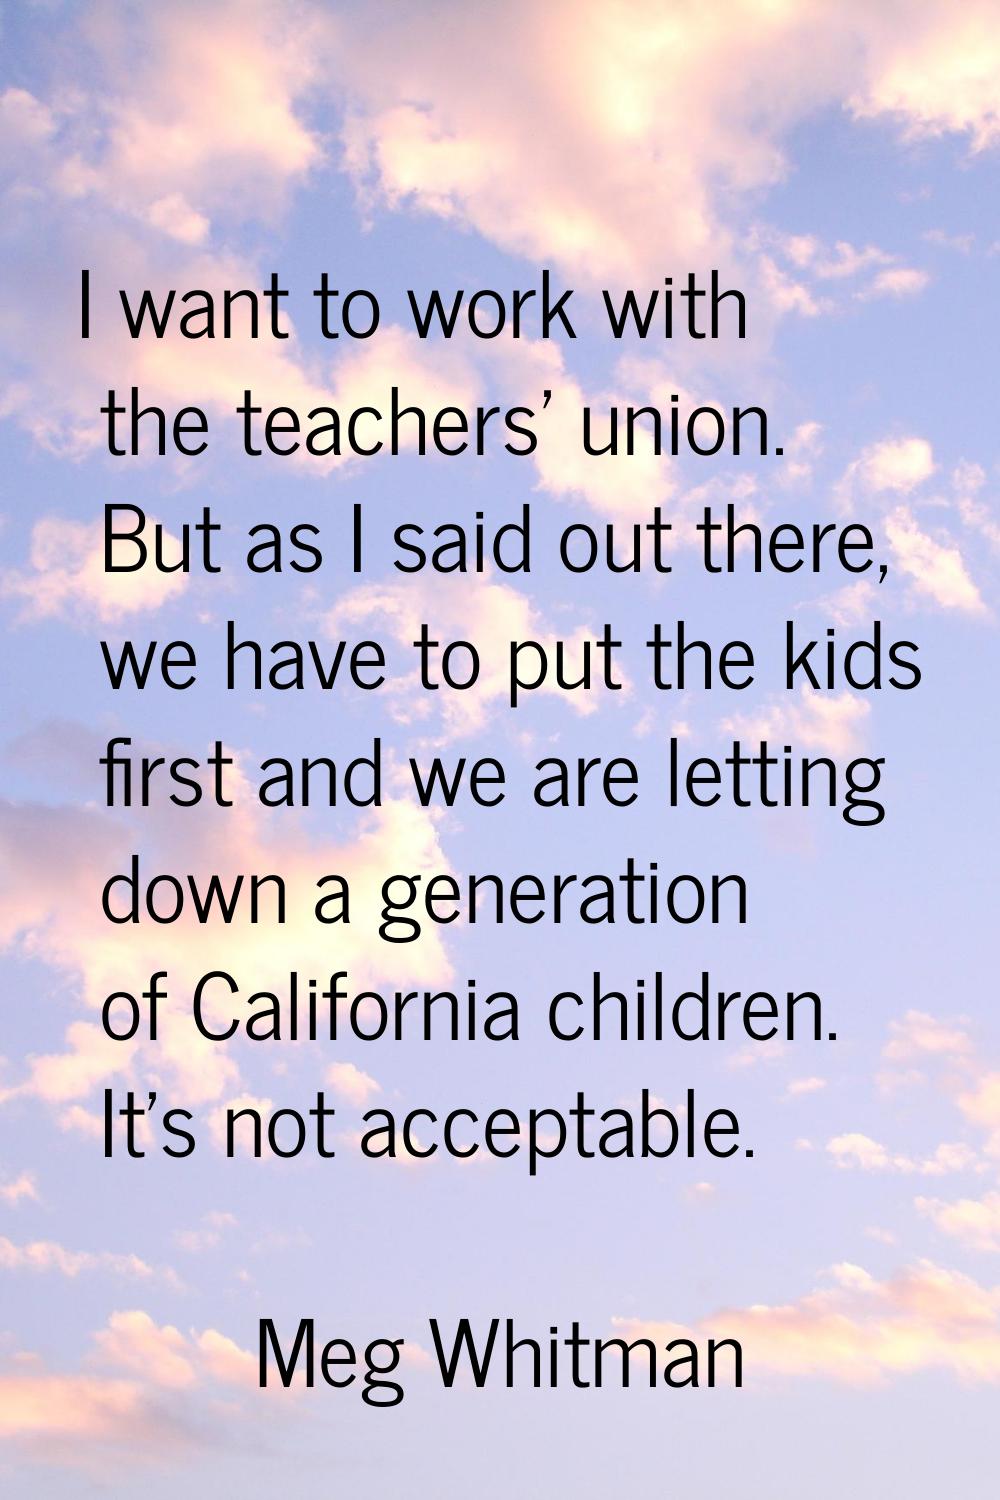 I want to work with the teachers' union. But as I said out there, we have to put the kids first and